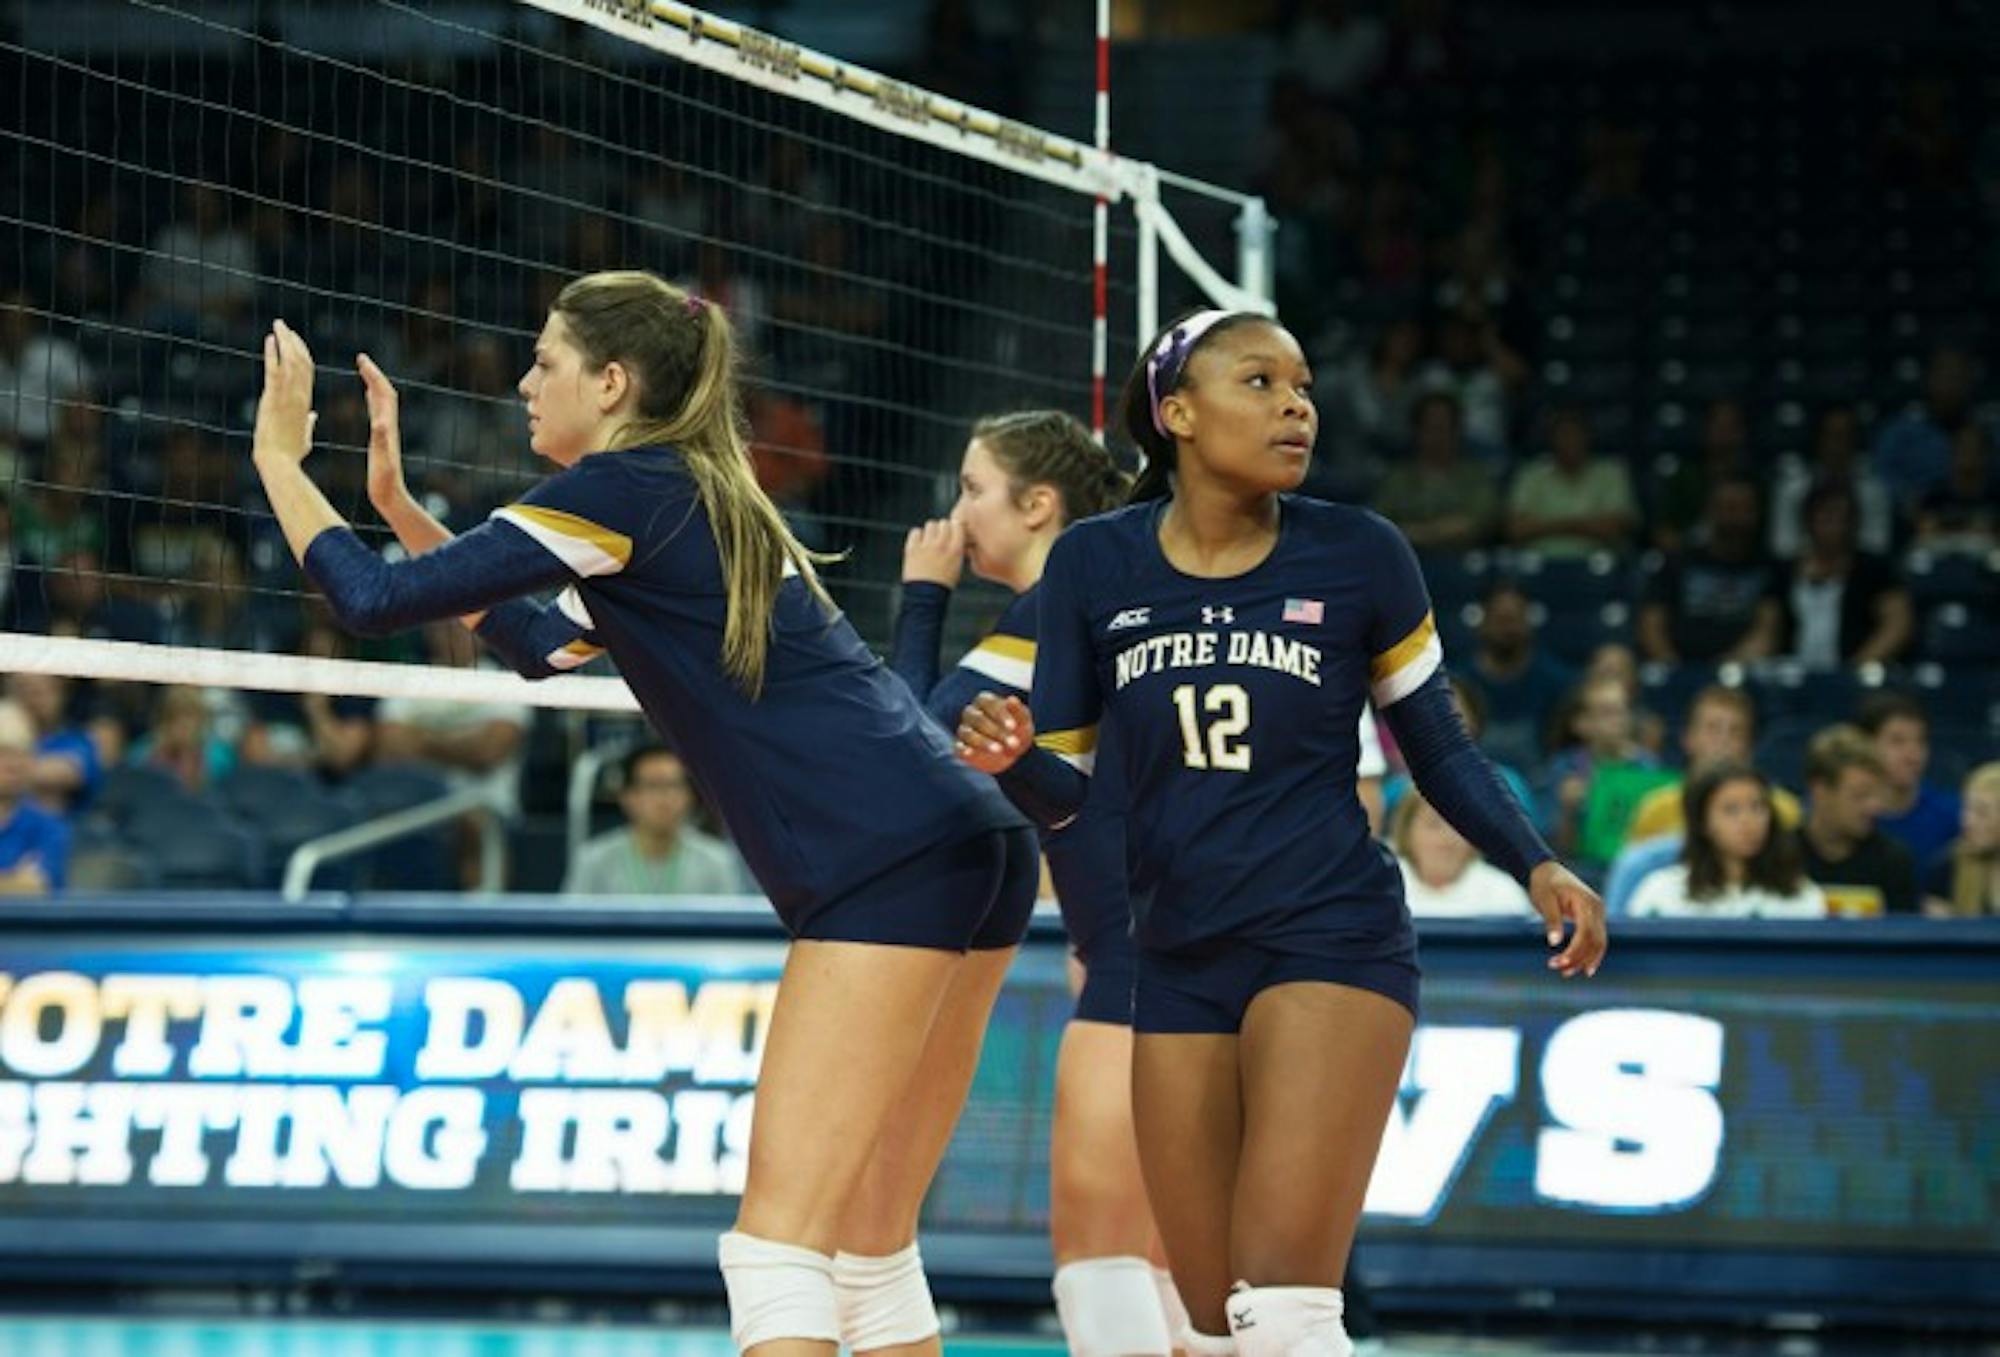 Irish freshman outside hitter Jemma Yeadon readies for the next point during Notre Dame’s 3-0 loss to Coastal Carolina on Friday at Purcell Pavilion. Yeadon had a team-high 13 kills in the match.